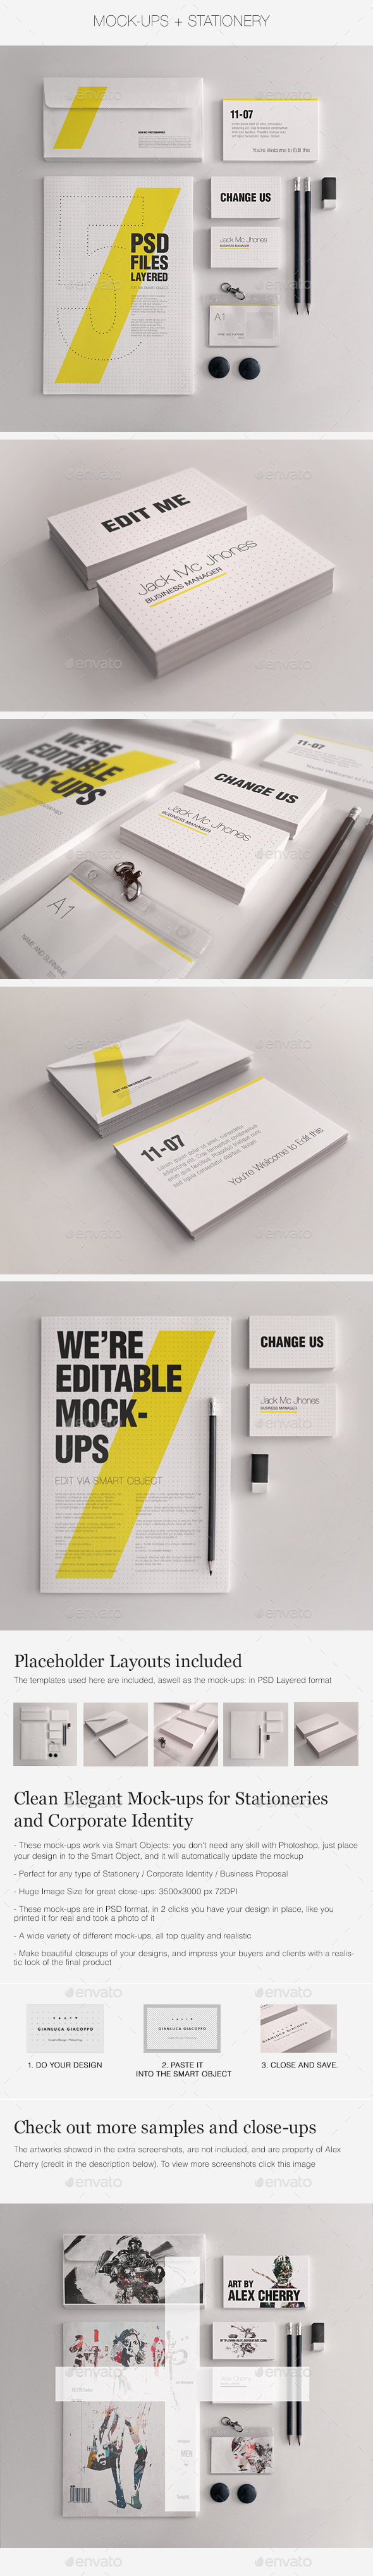 Mockup Graphics Designs Templates From Graphicriver